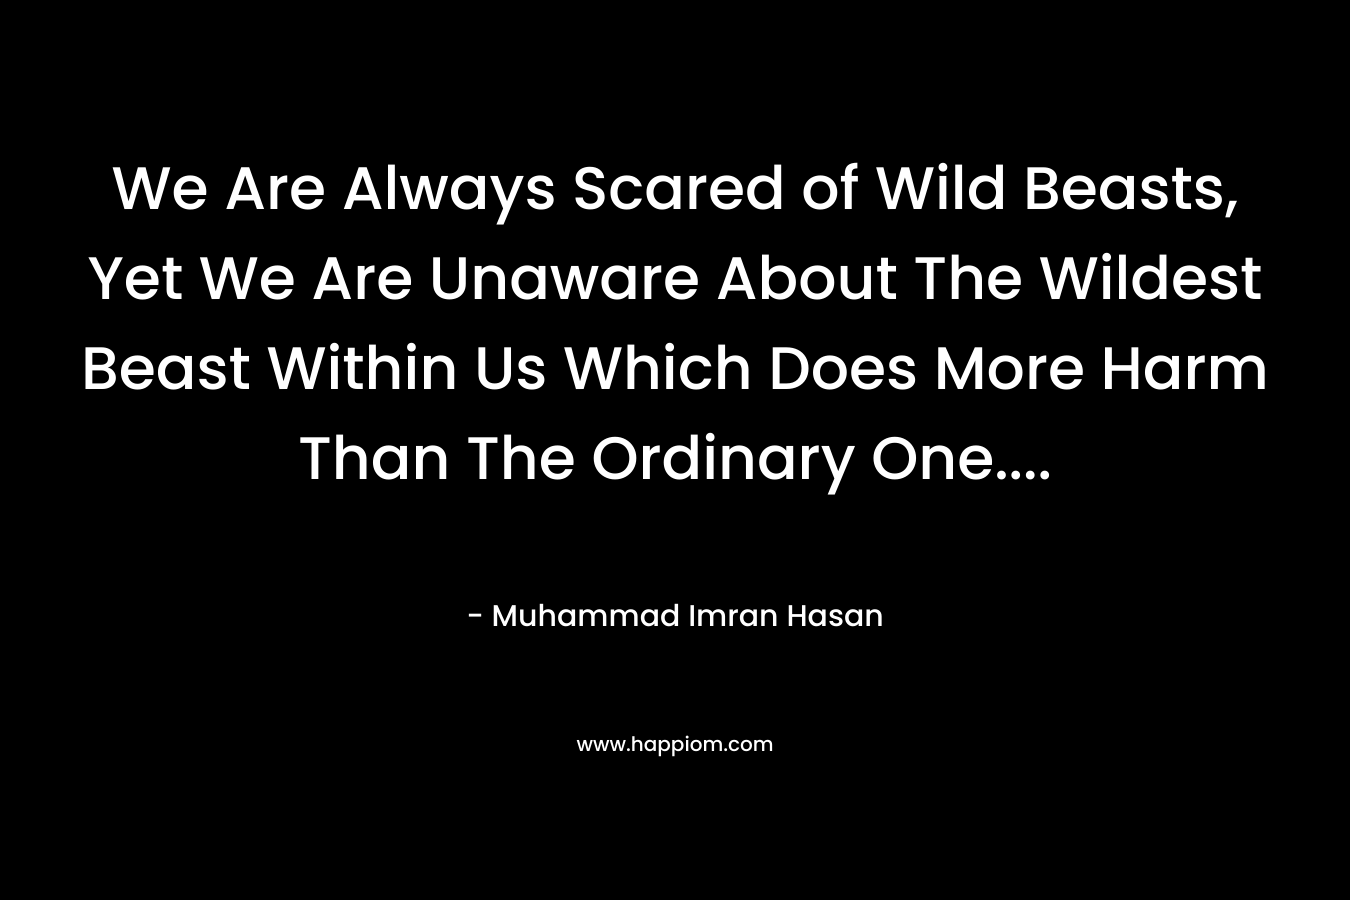 We Are Always Scared of Wild Beasts, Yet We Are Unaware About The Wildest Beast Within Us Which Does More Harm Than The Ordinary One....